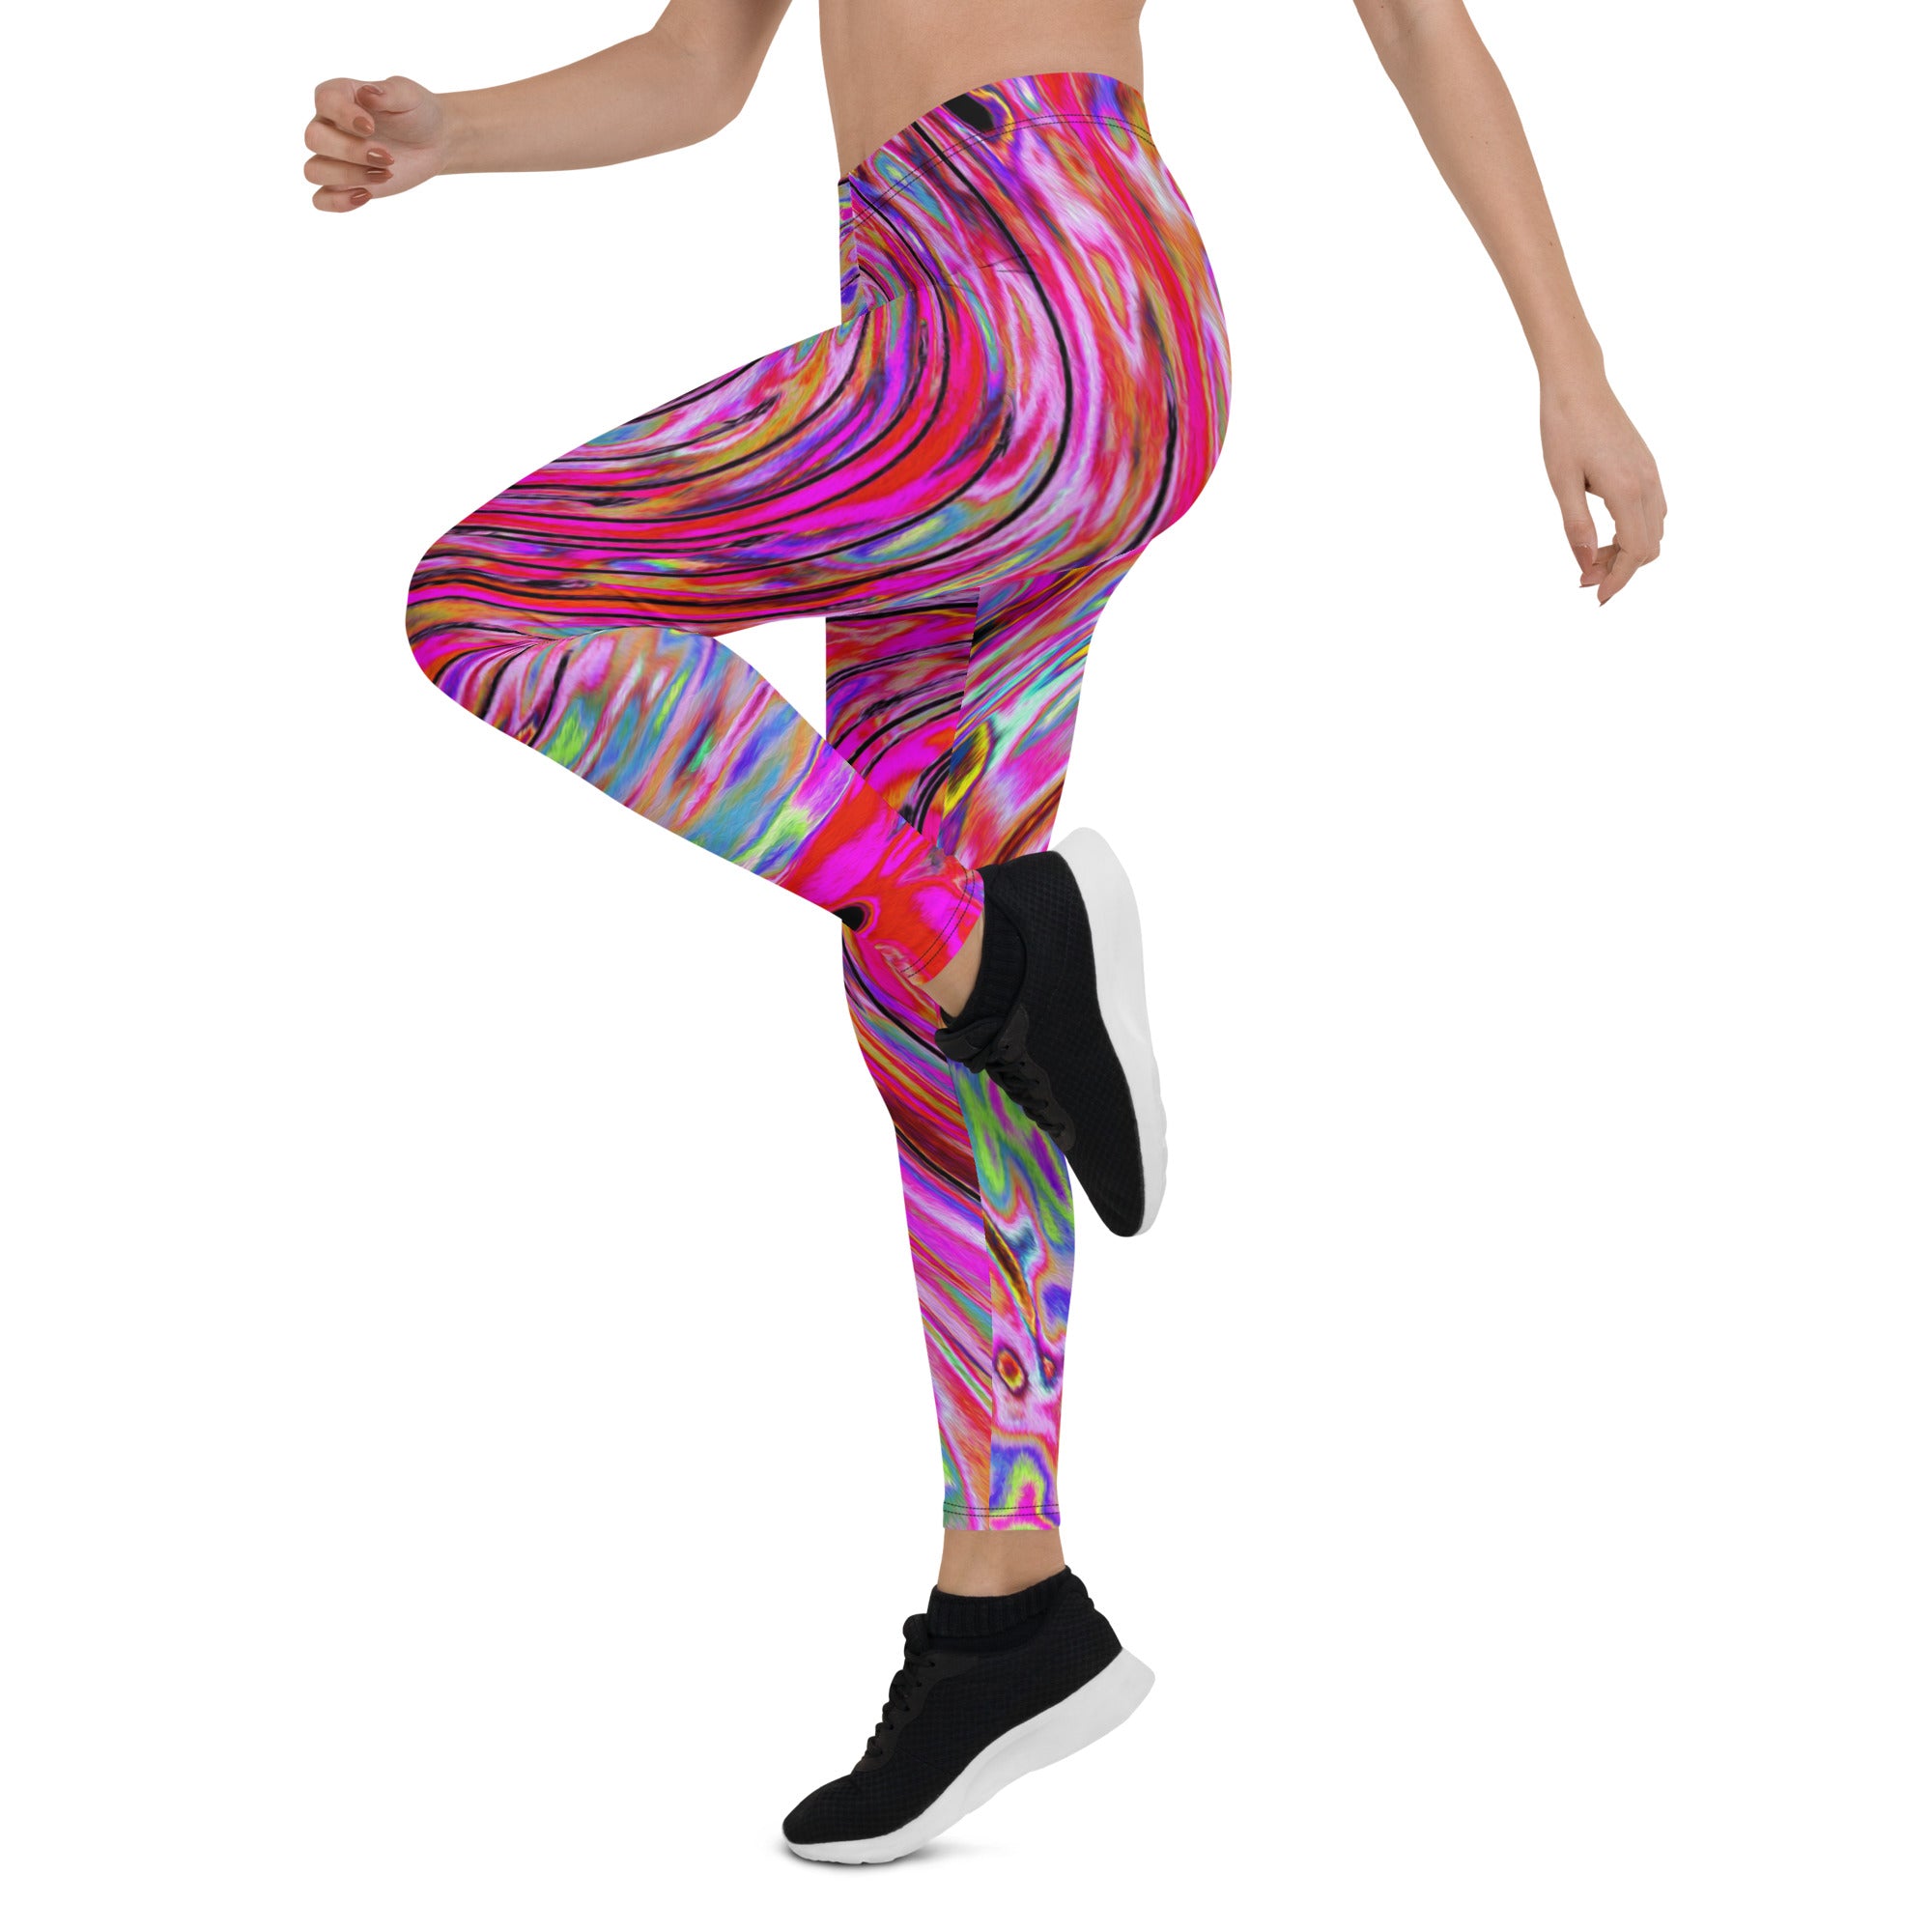 Leggings for Women, Cool Abstract Retro Hot Pink and Red Floral Swirl